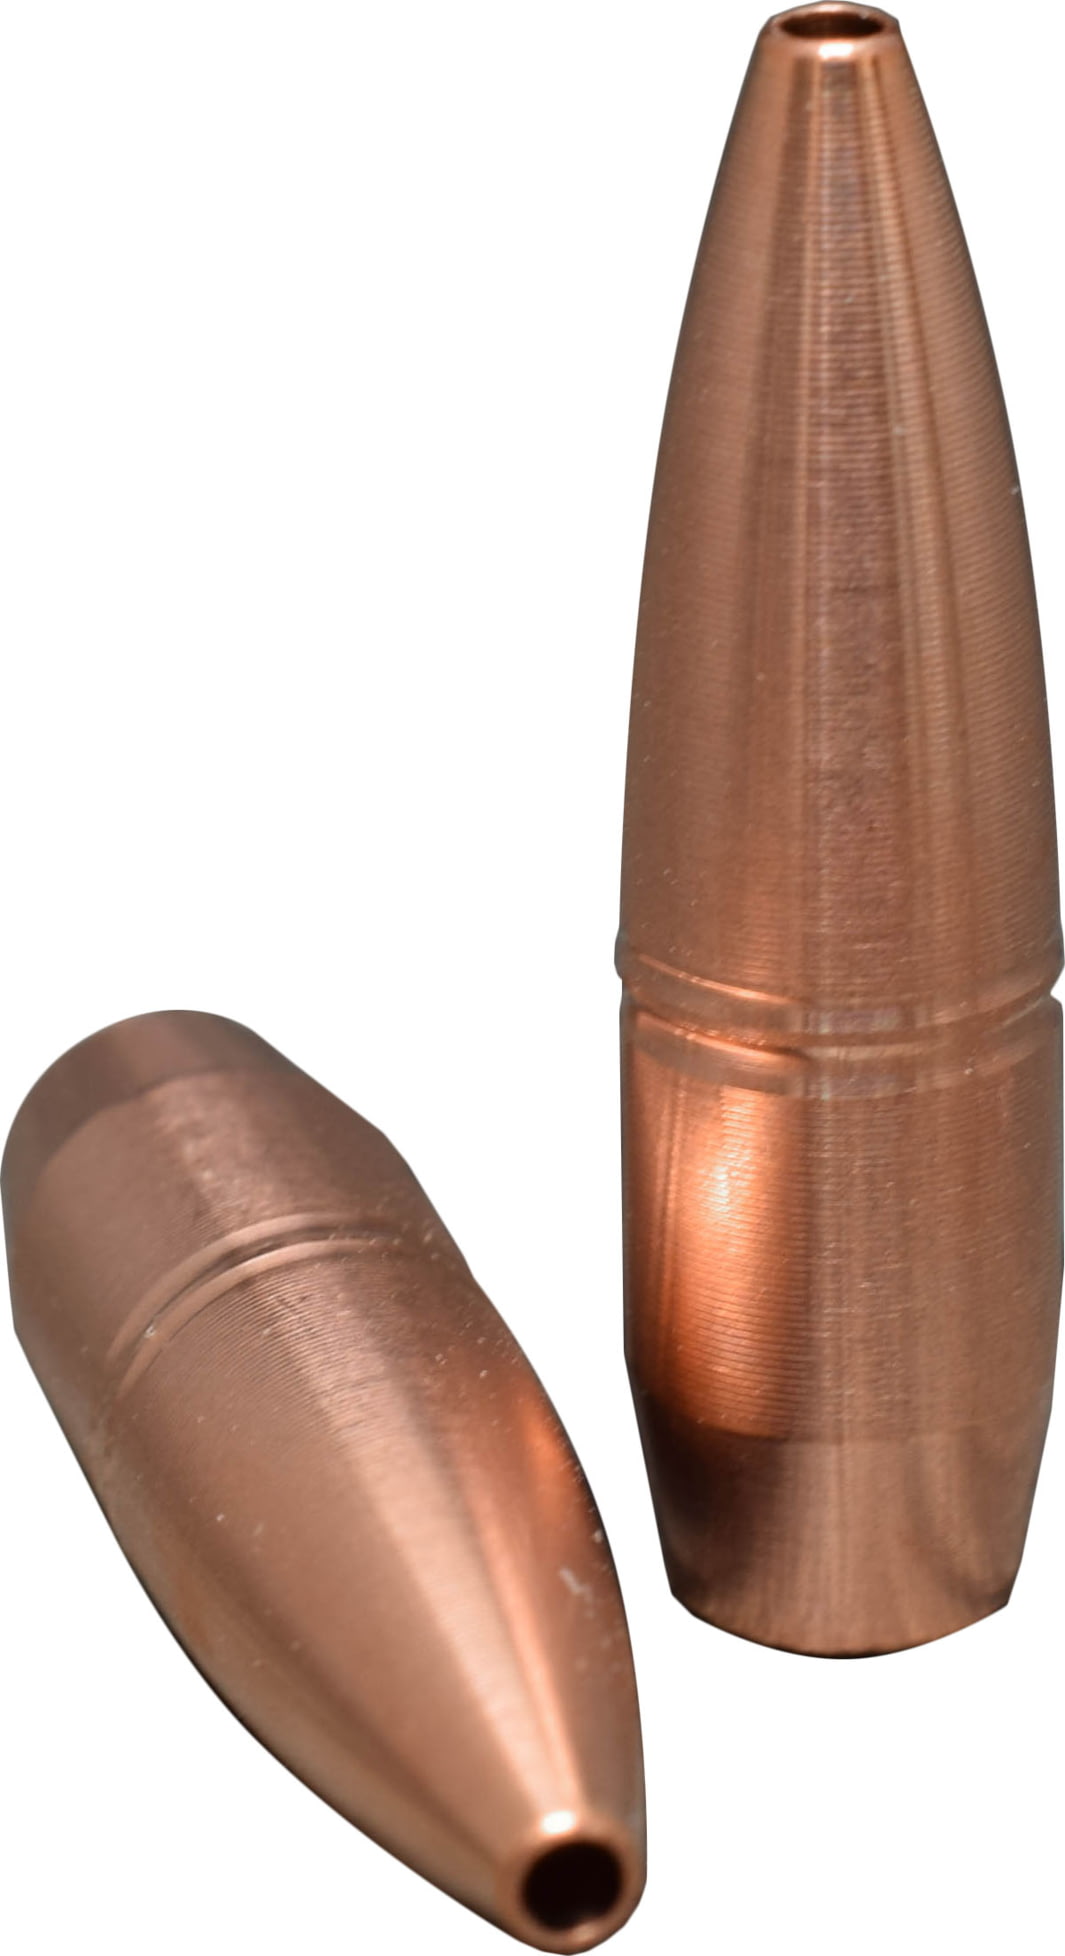 Opplanet Cutting Edge Bullets Match Tactical Hunting Rifle Bullet 224 5 6mm 55 Grains Mth B55 Main 